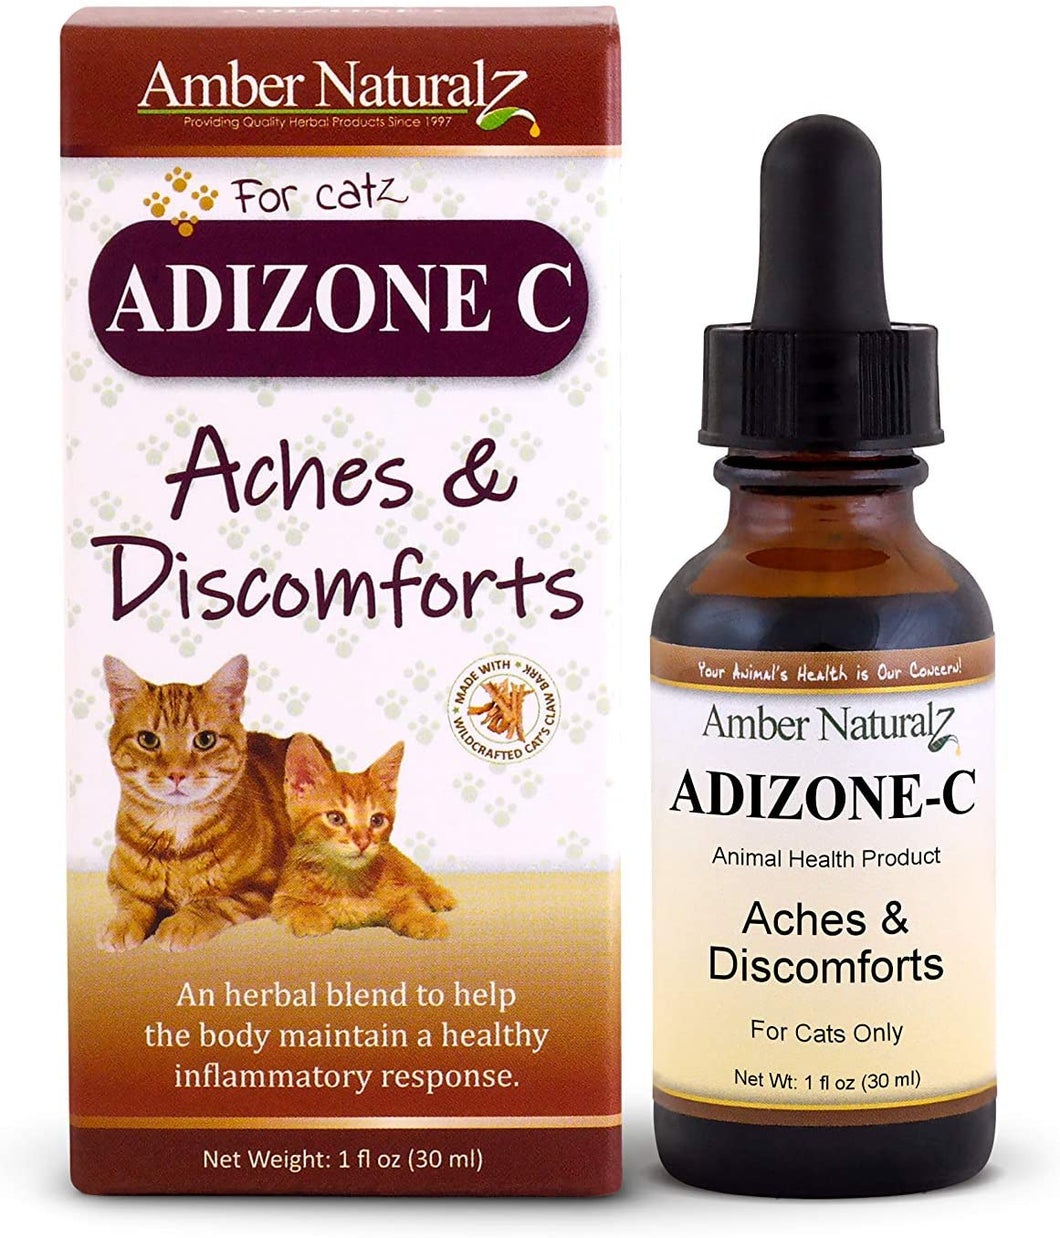 Amber Naturalz Adizone C: Aches & Discomforts - for Cats, 1 Ounce